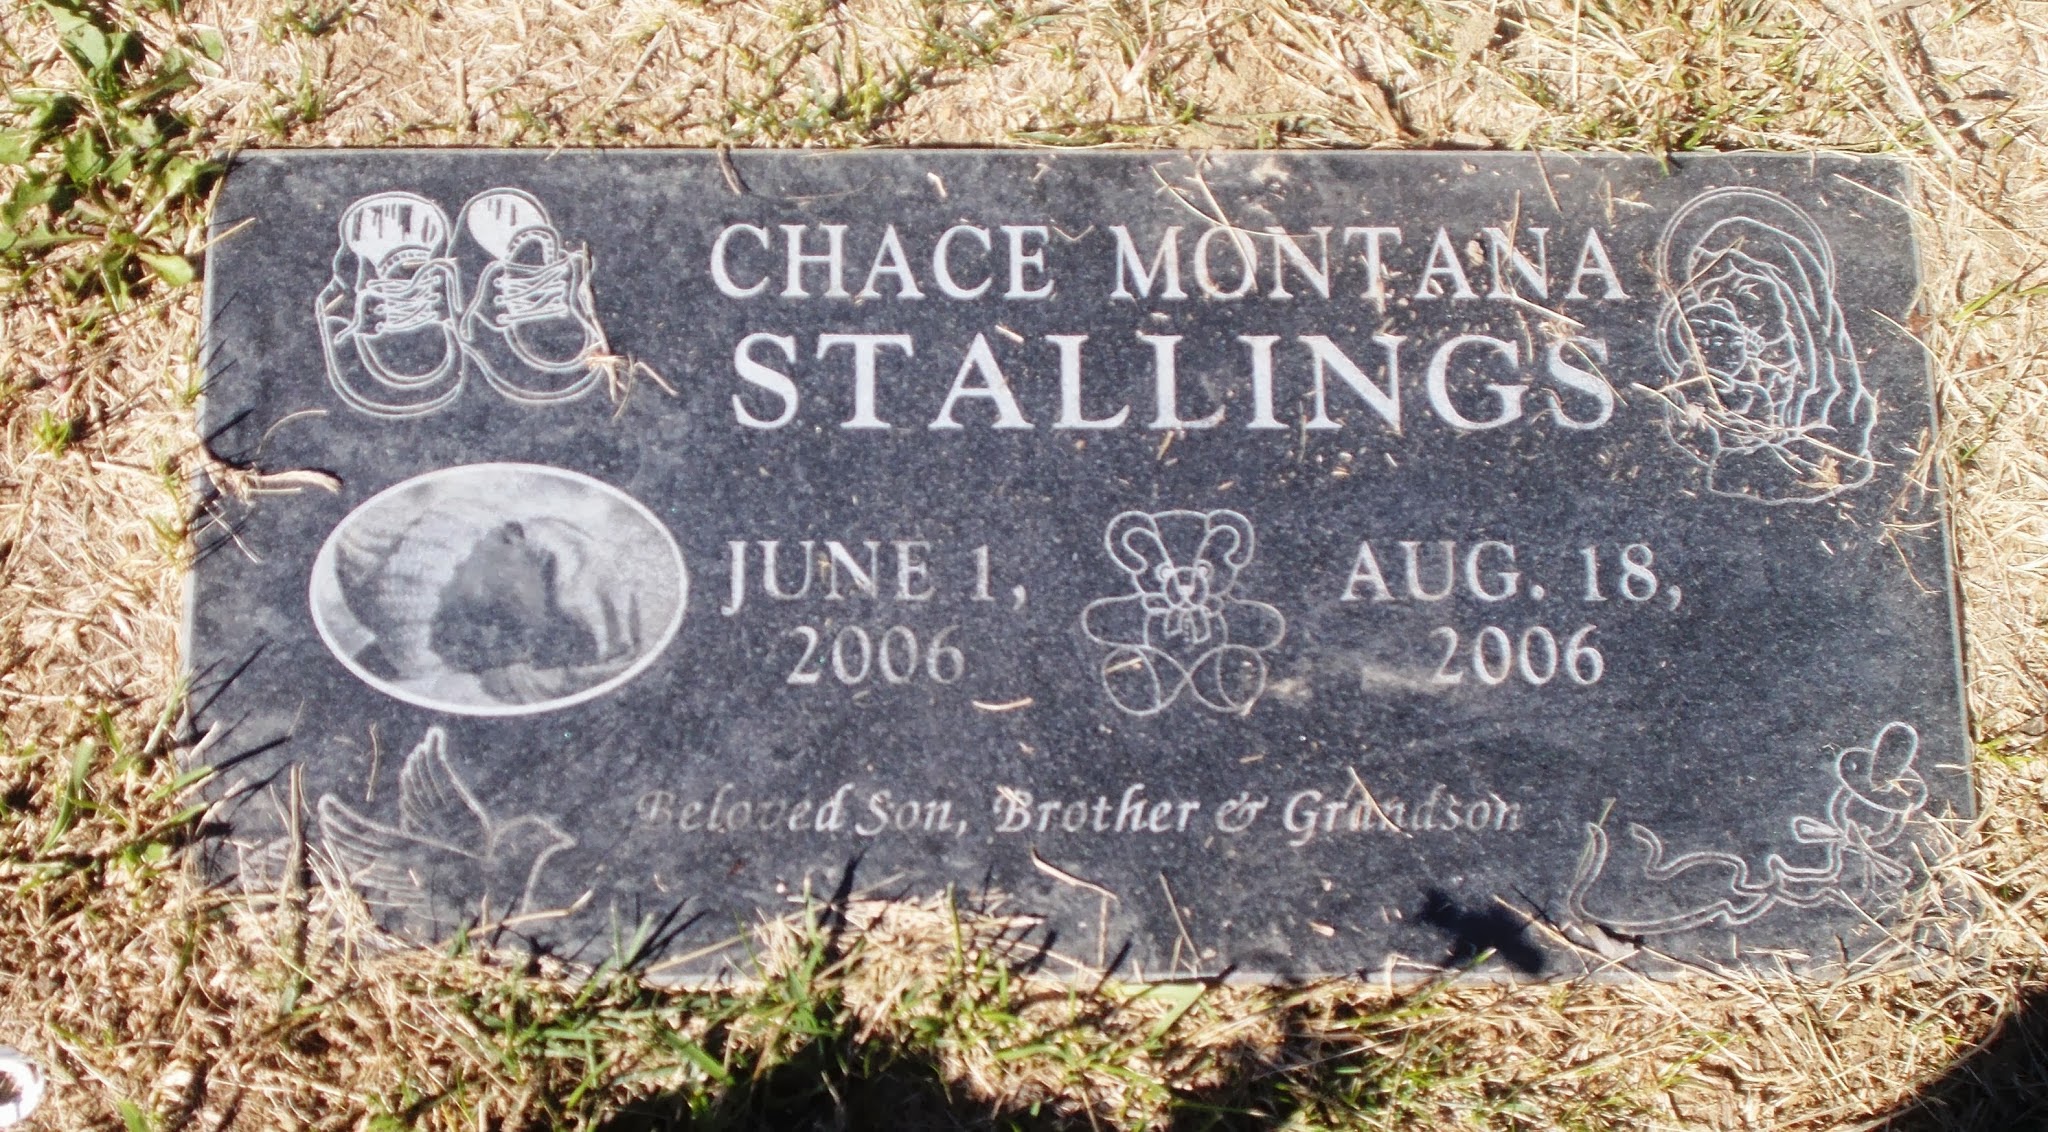 Chace Montana Stallings